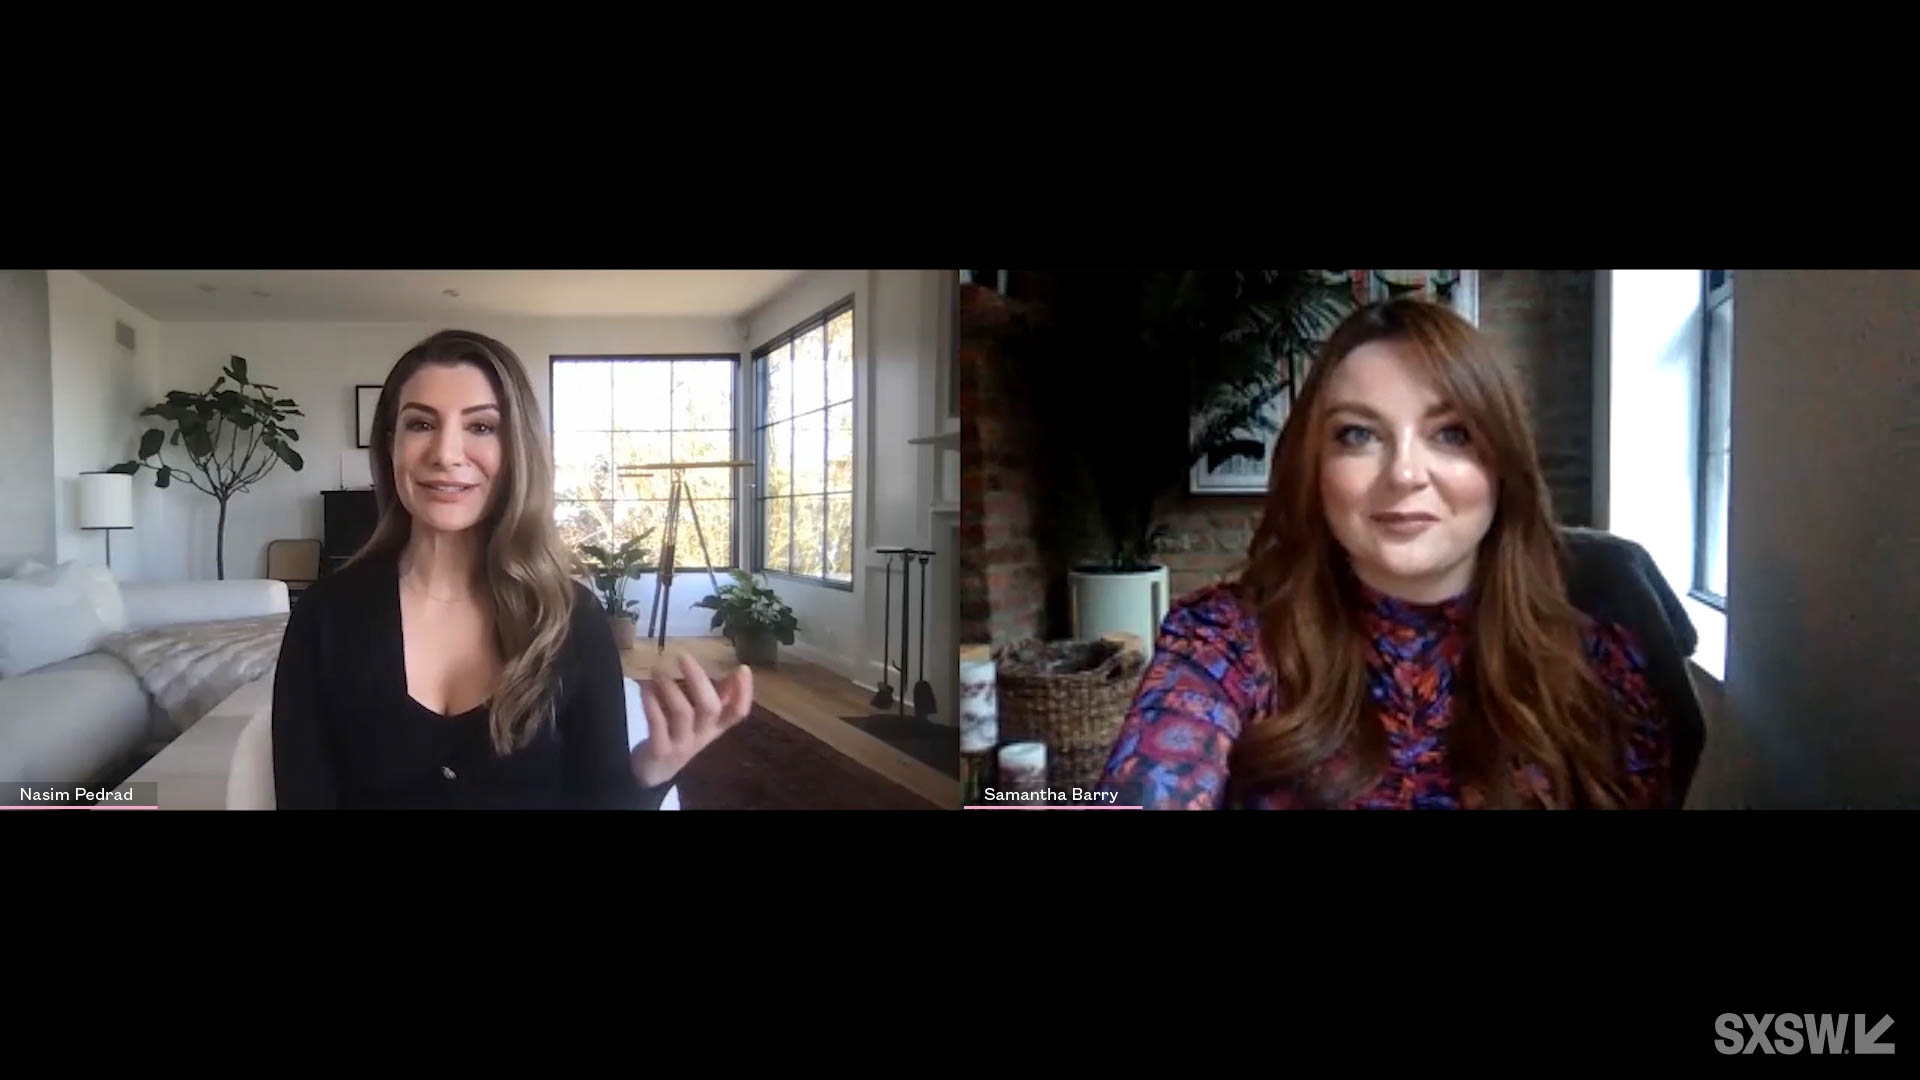 Samantha Barry speaks with Nasim Pedrad in the session “Homeroom with Nasim Pedrad, creator of TBS’s new comedy series Chad” at SXSW Online on March 18, 2021.